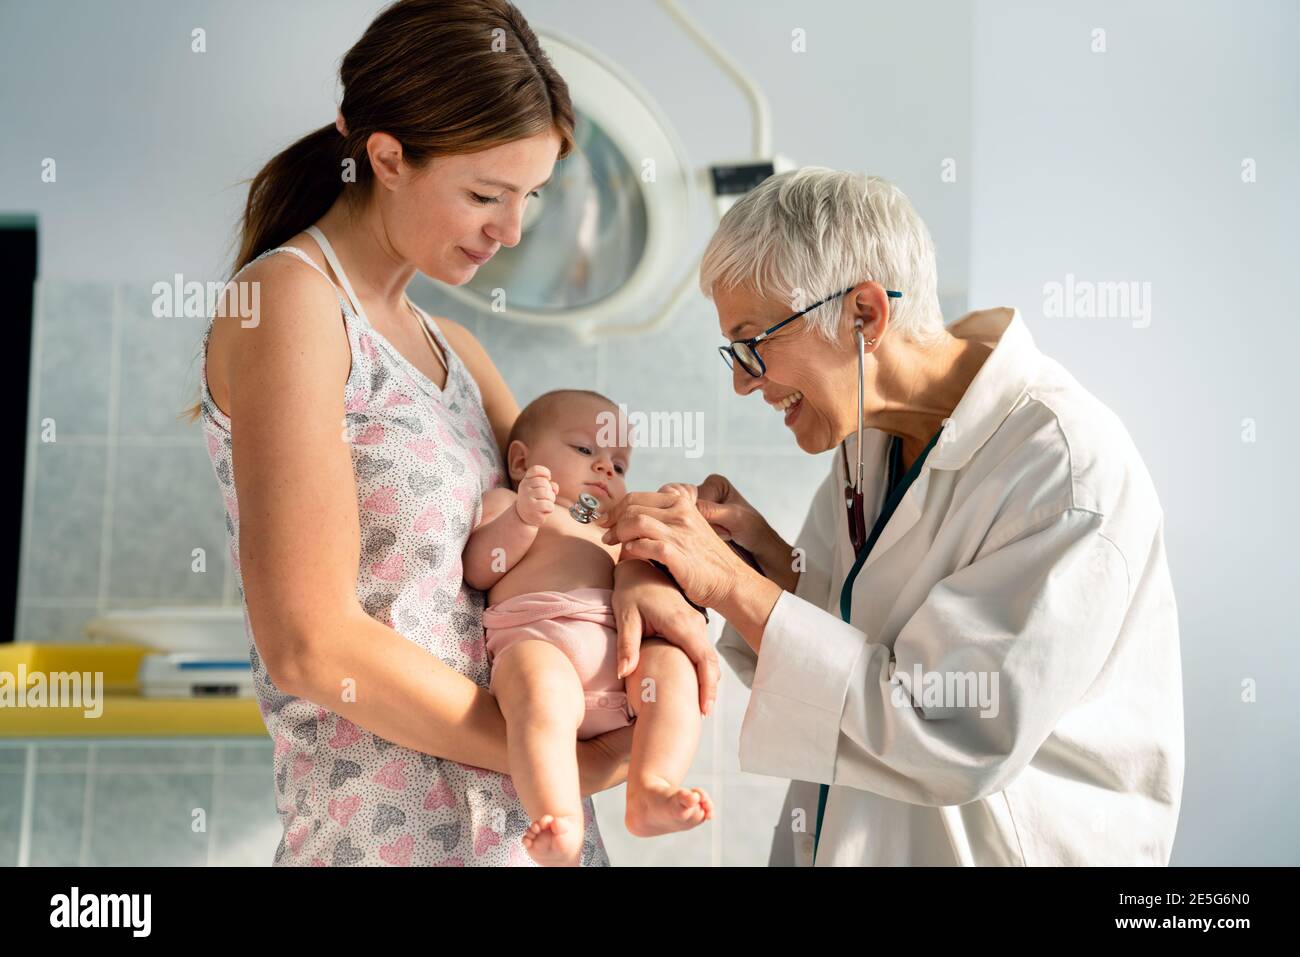 Mother holding baby for pediatrician doctor to examine Stock Photo